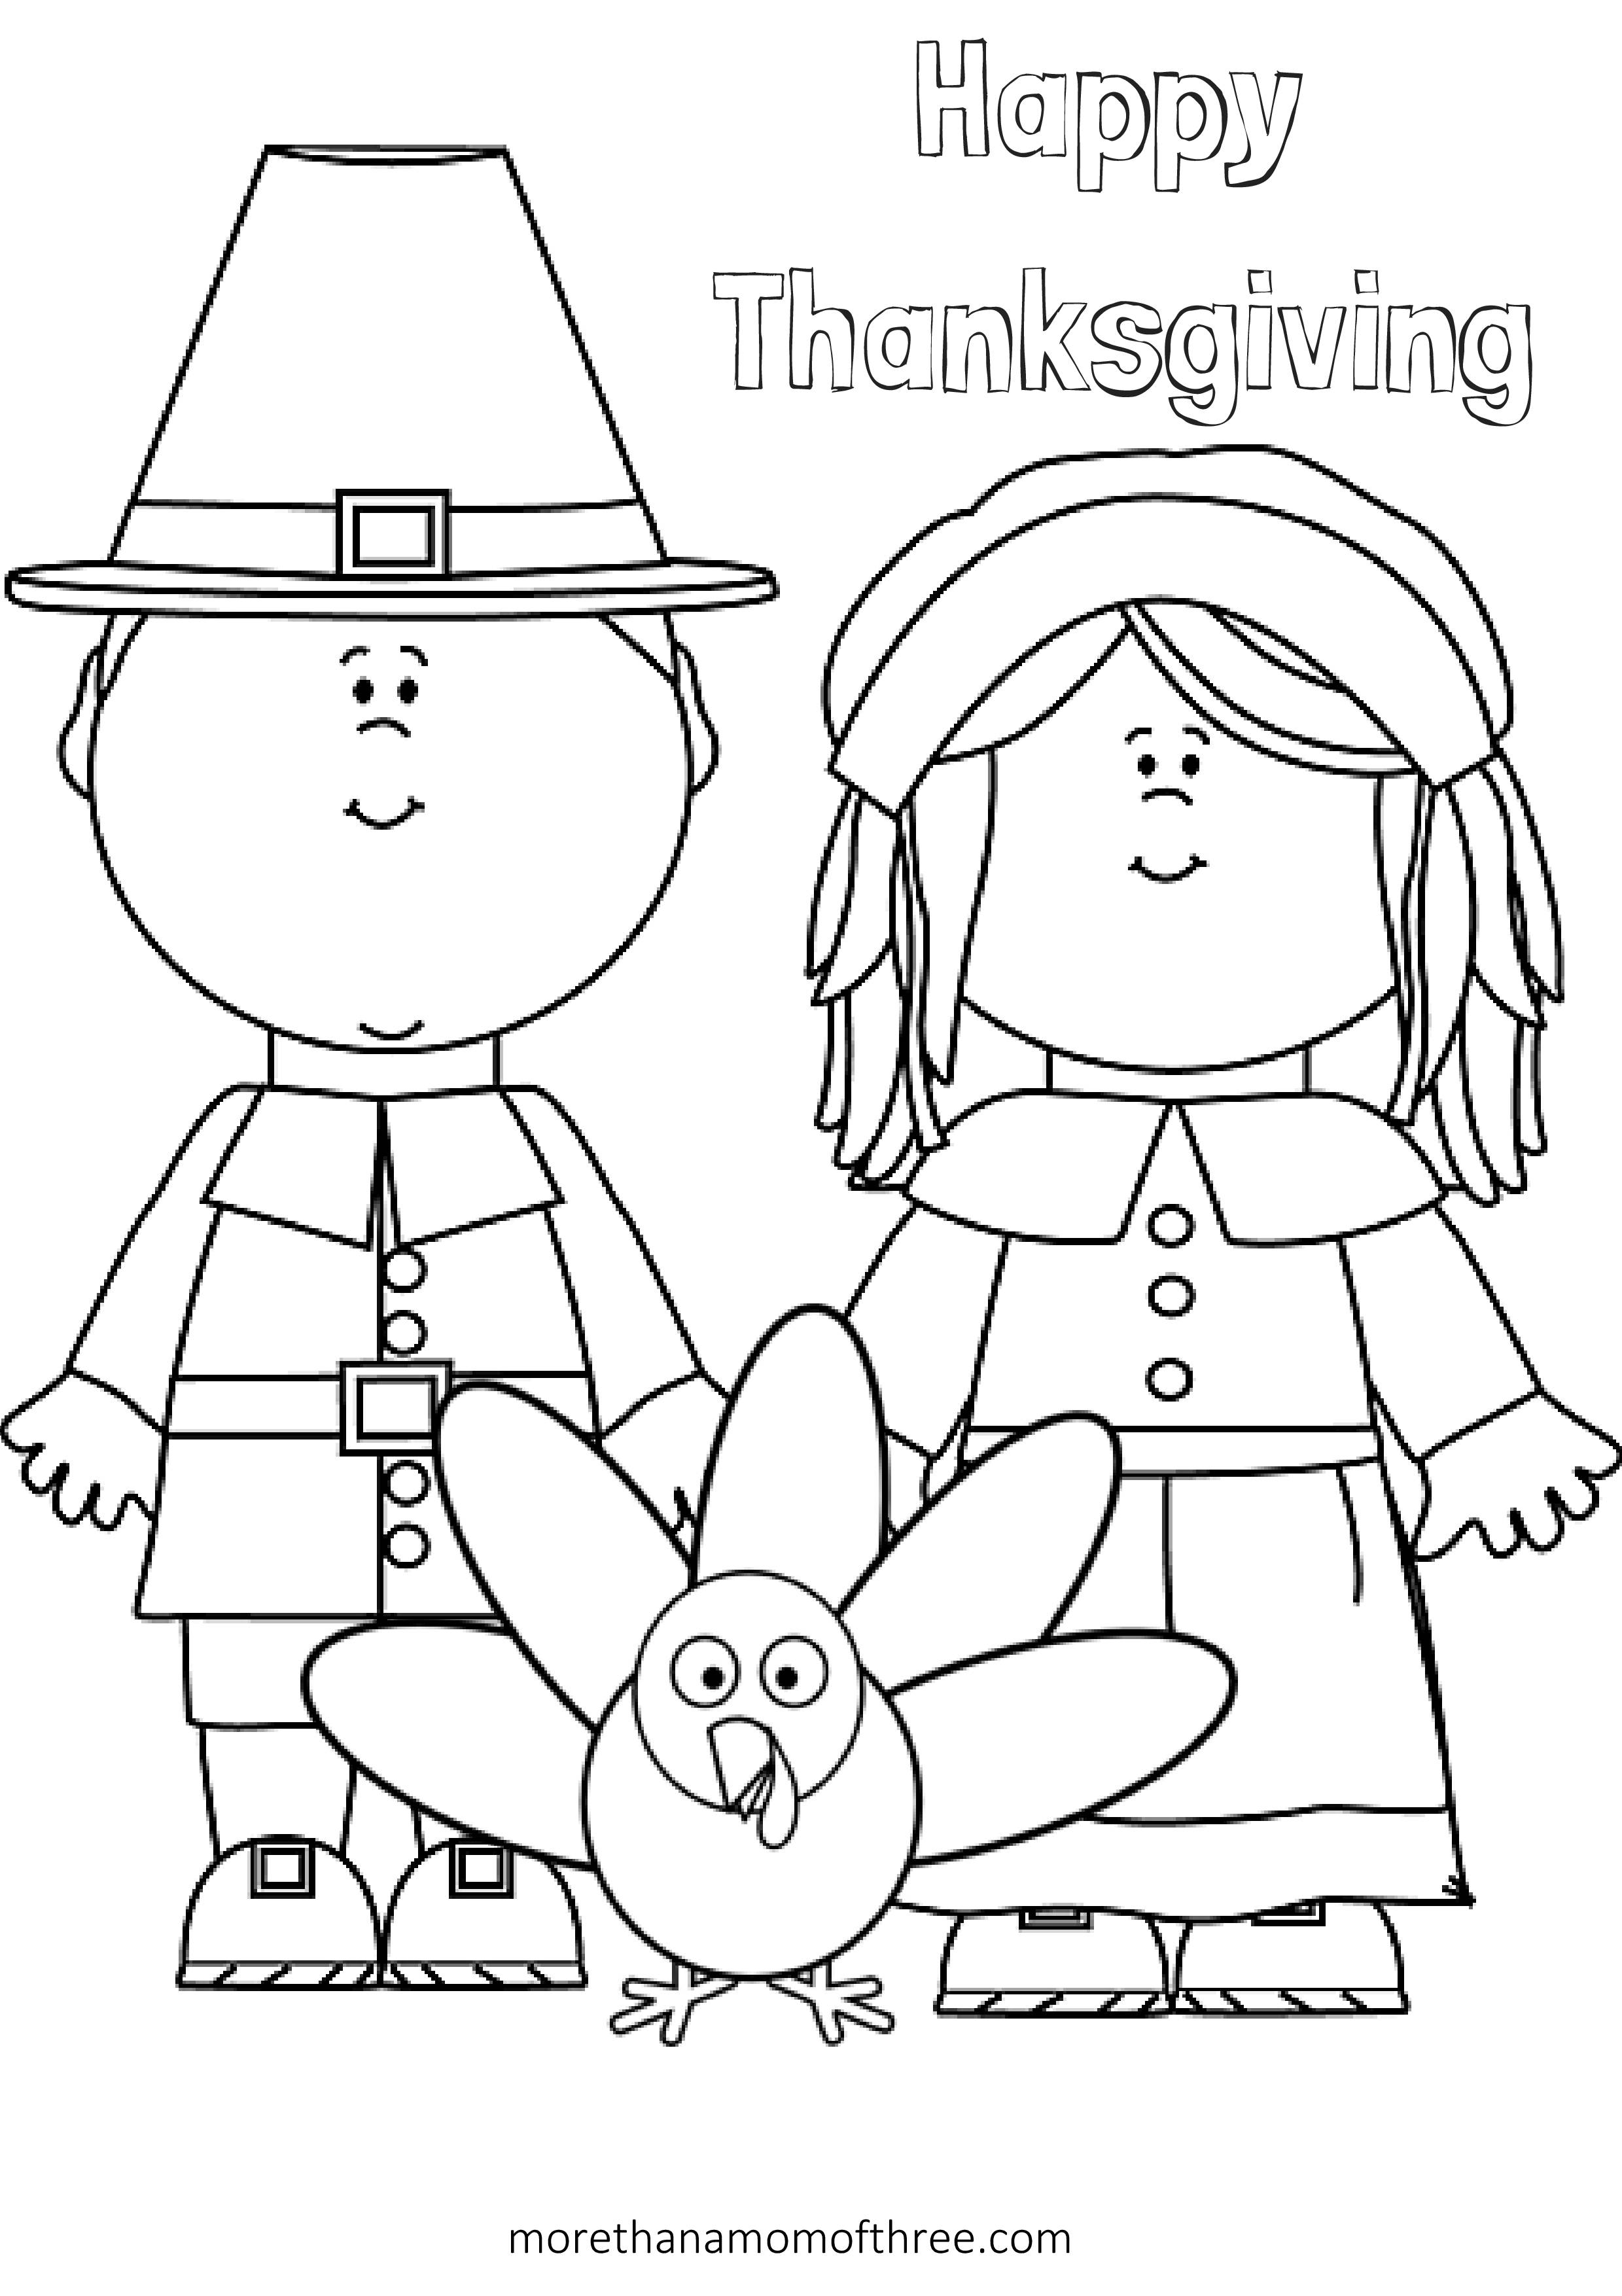 Thanksgiving Coloring Pages To Print For Free